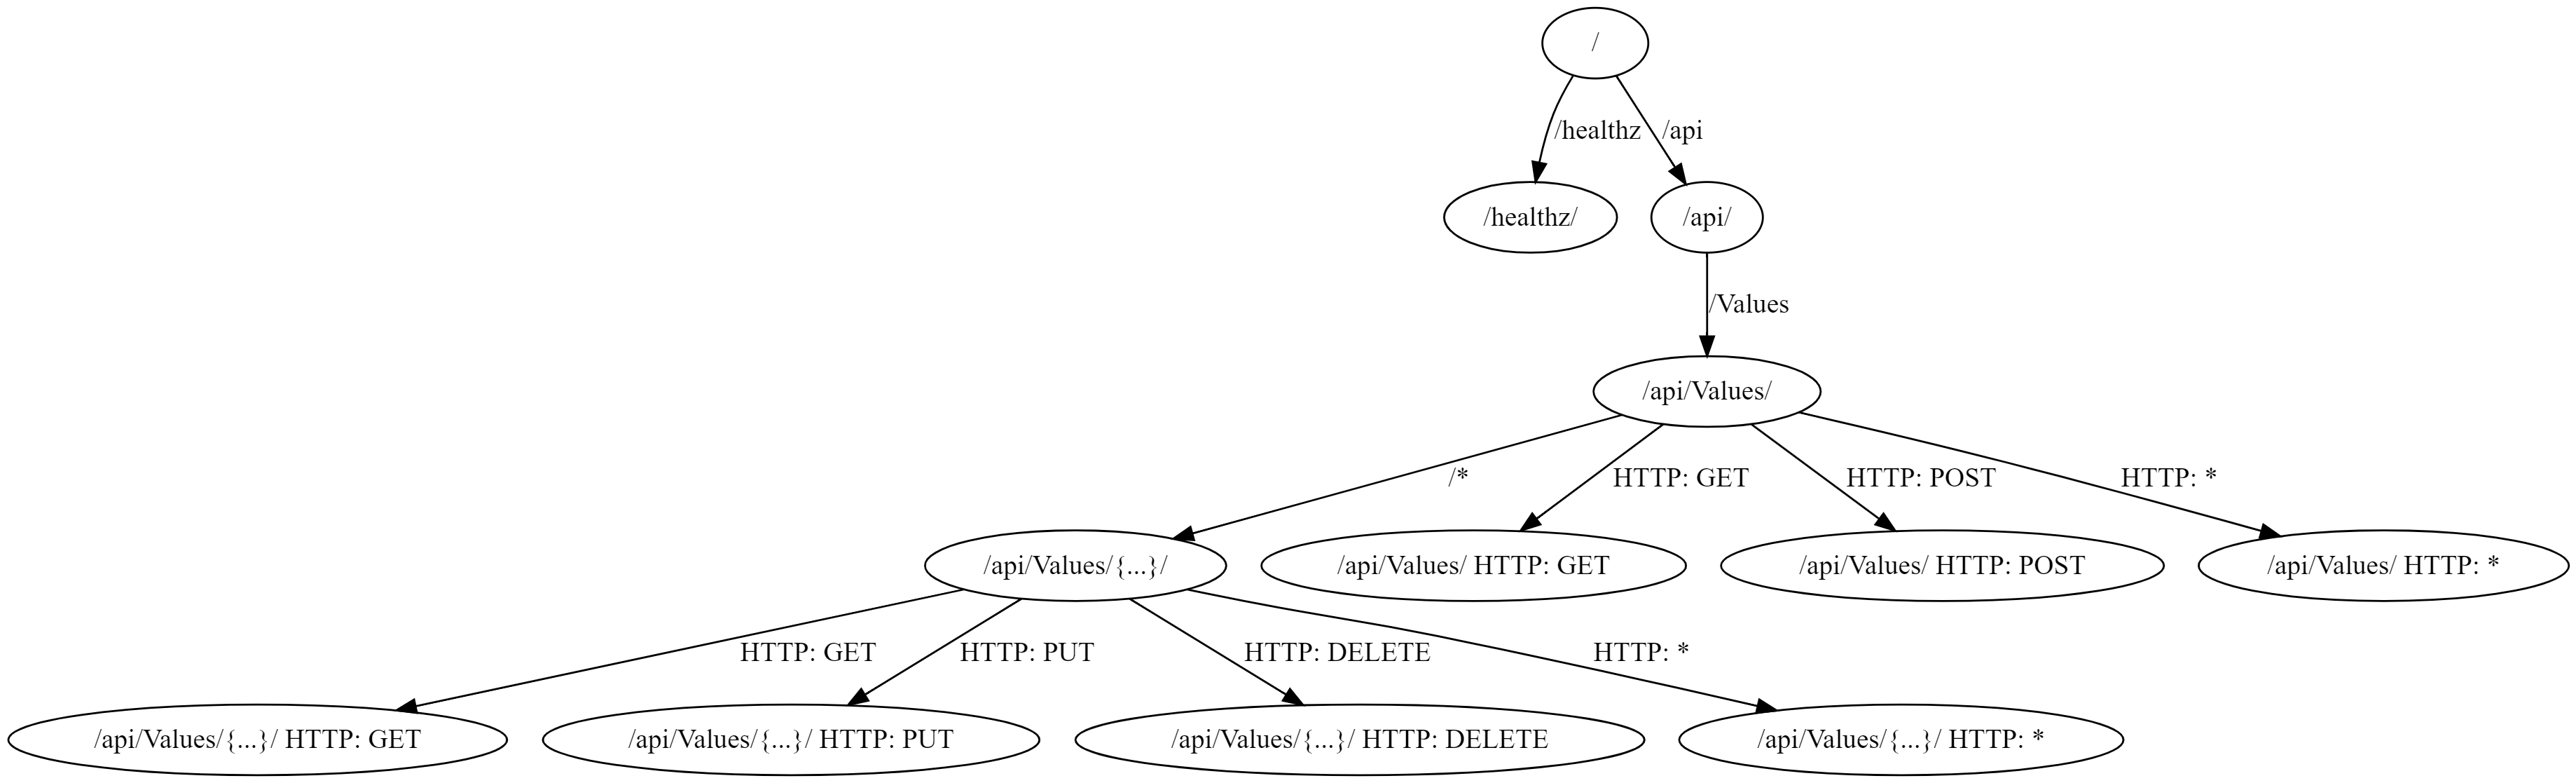 An example endpoint routing graph